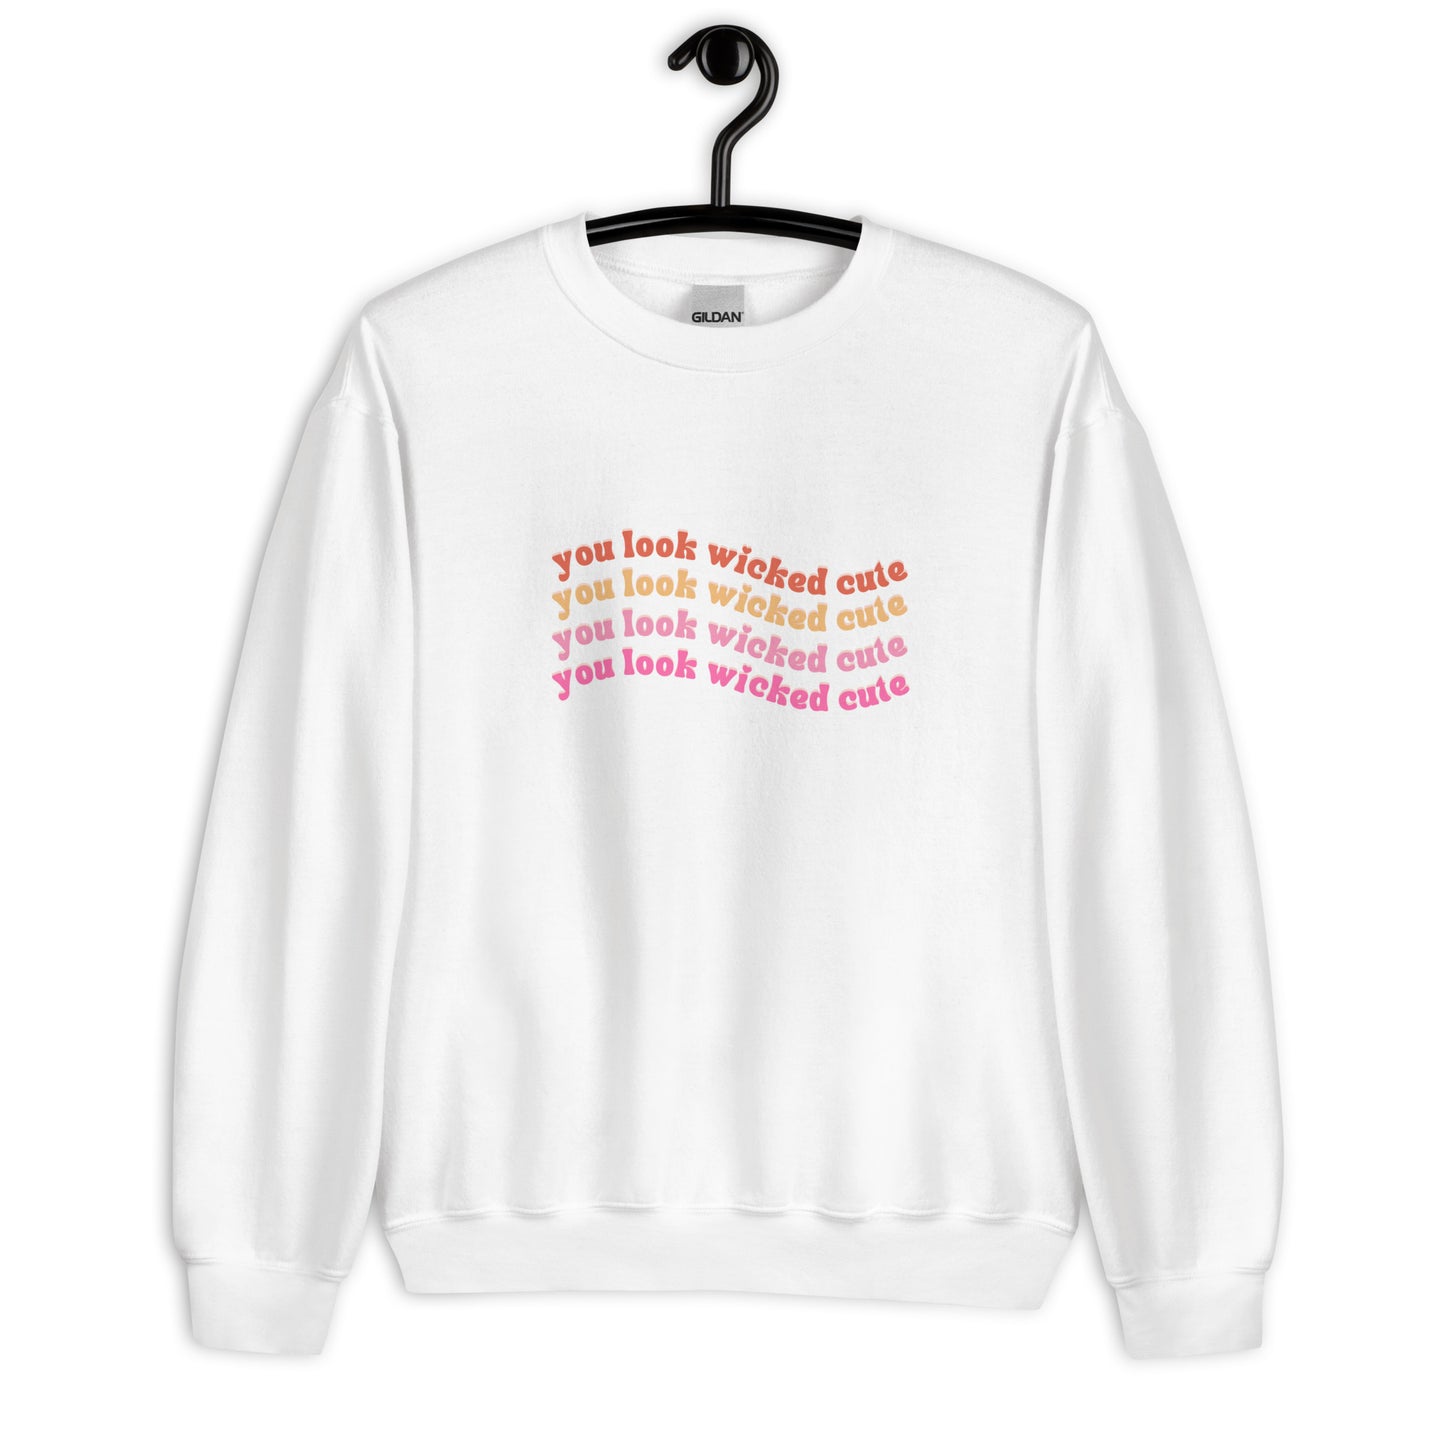 white crewneck that says "you look wicked cute" in red pink and orange lettering